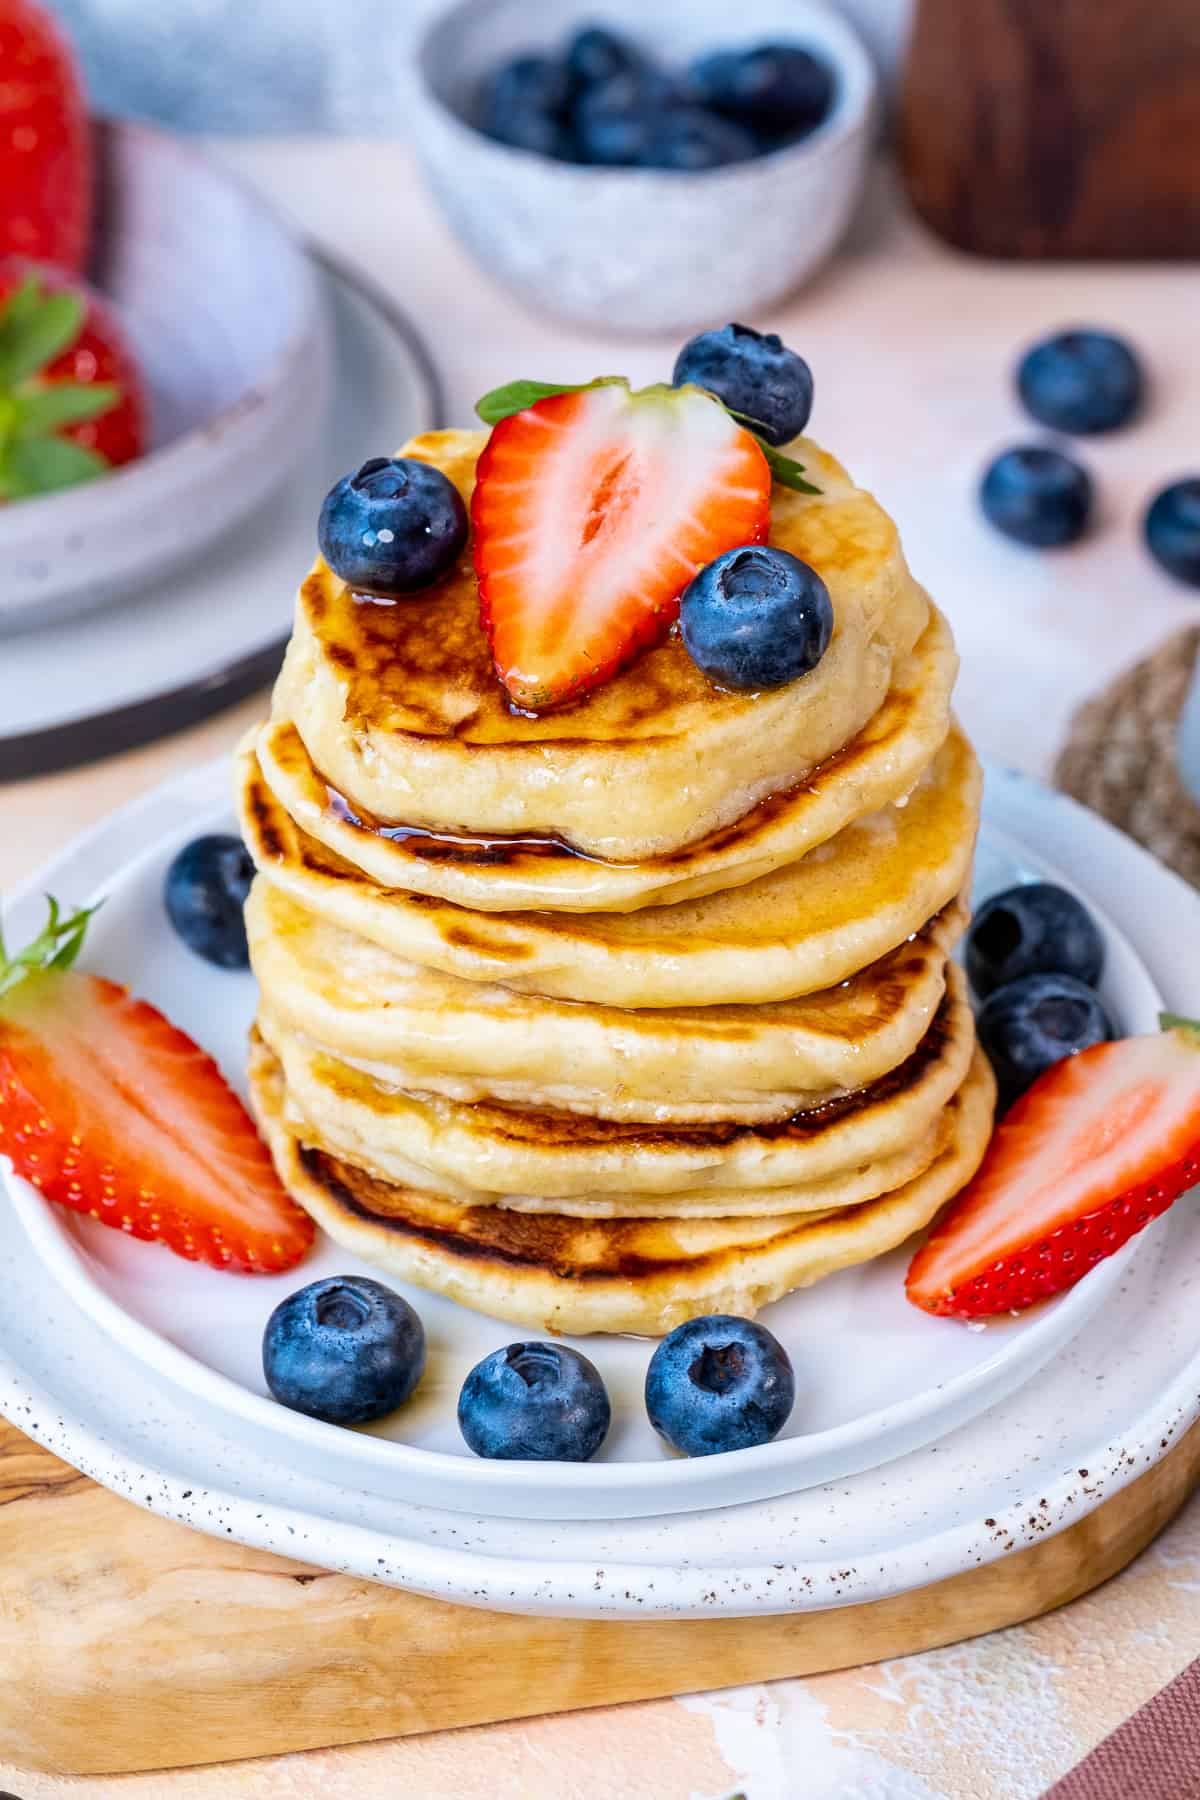 Almond milk pancakes served with blueberries and strawberries on a white plate.